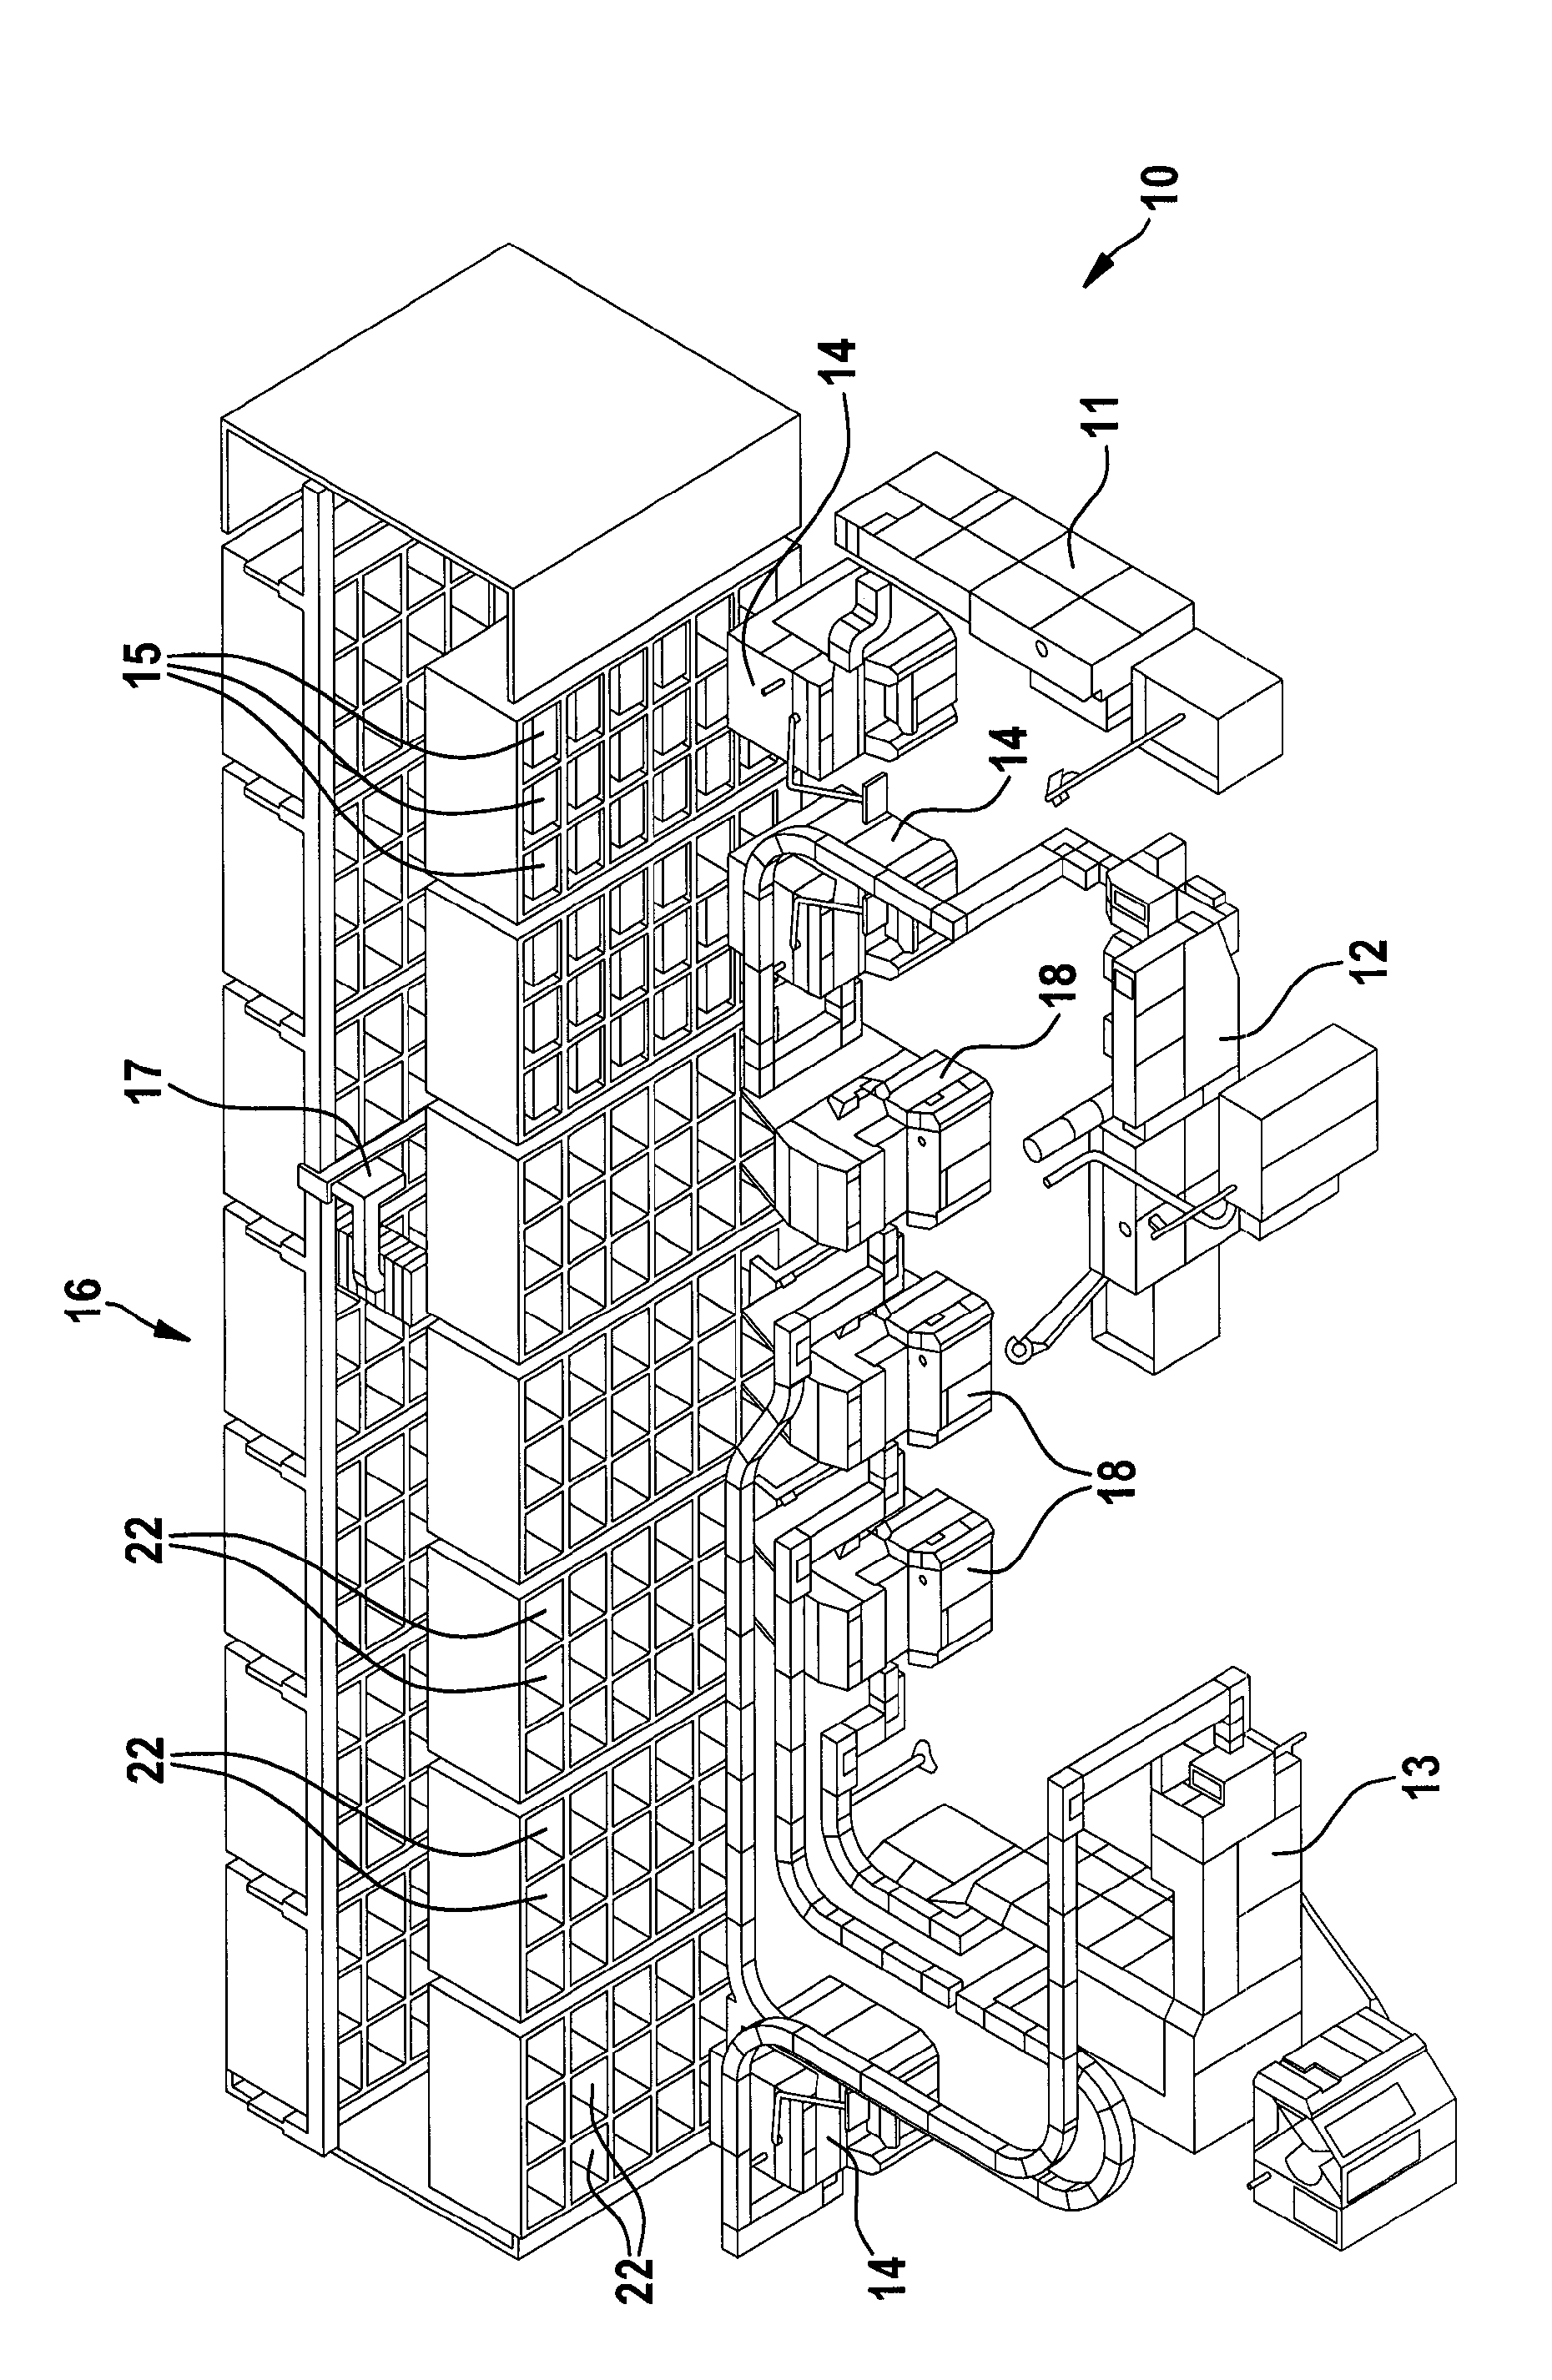 Device and method for producing and storing rod-shaped semi-finished products for the tobacco processing industry